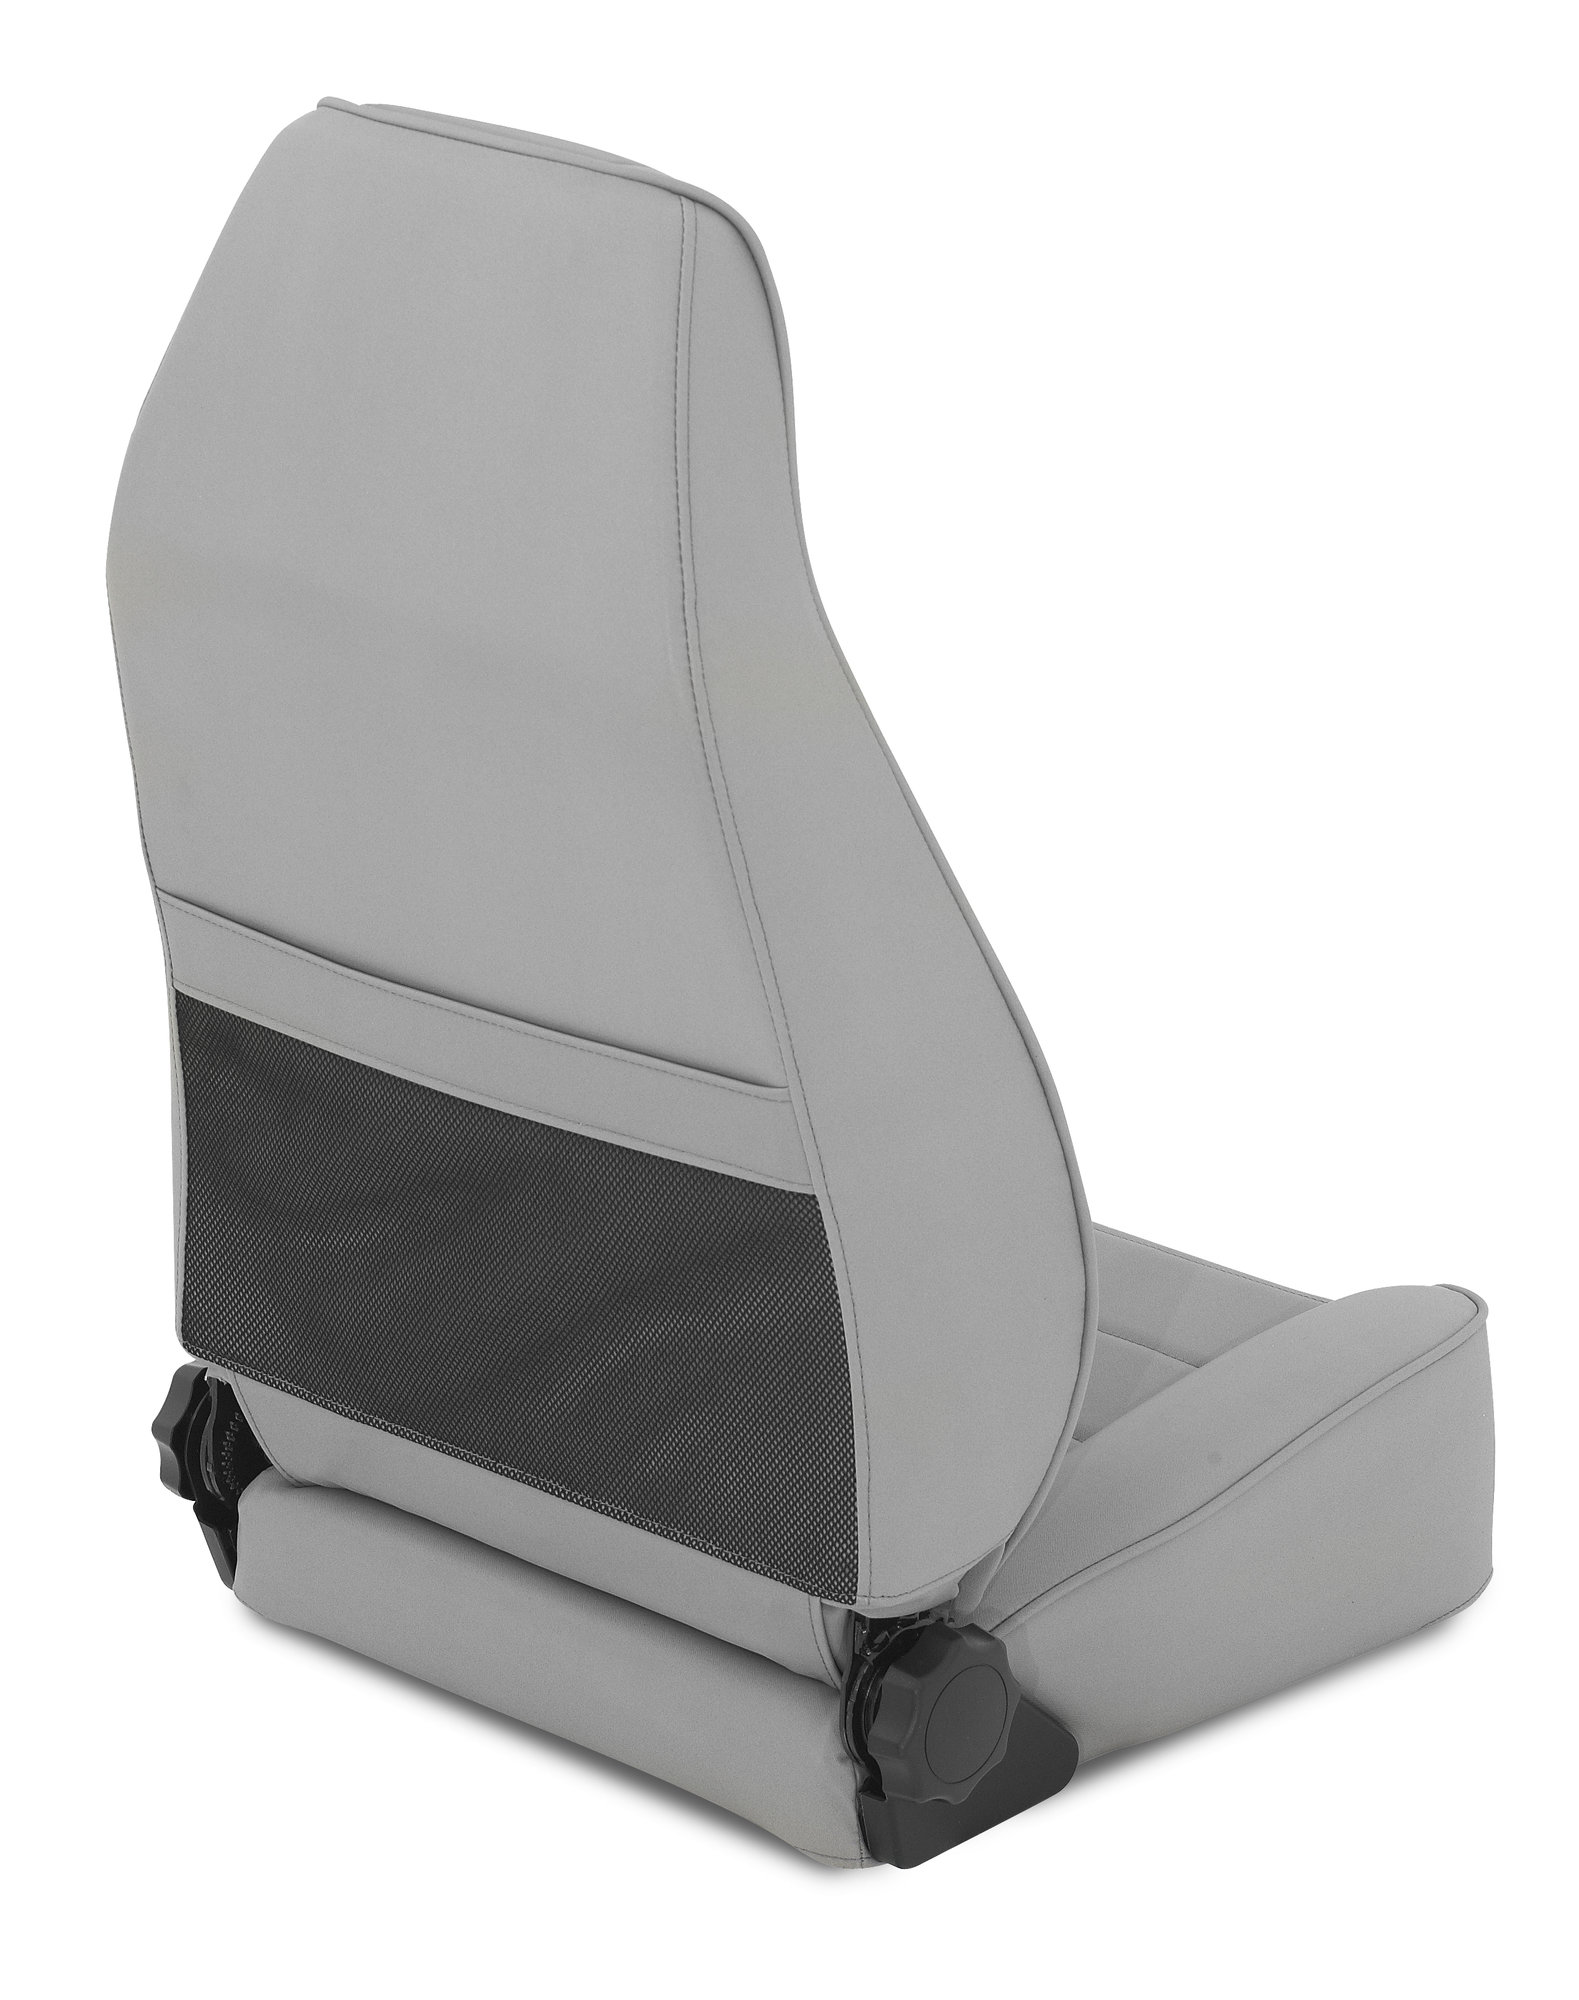 Smittybilt Factory Style Reclining Seat for 76-06 Jeep CJ